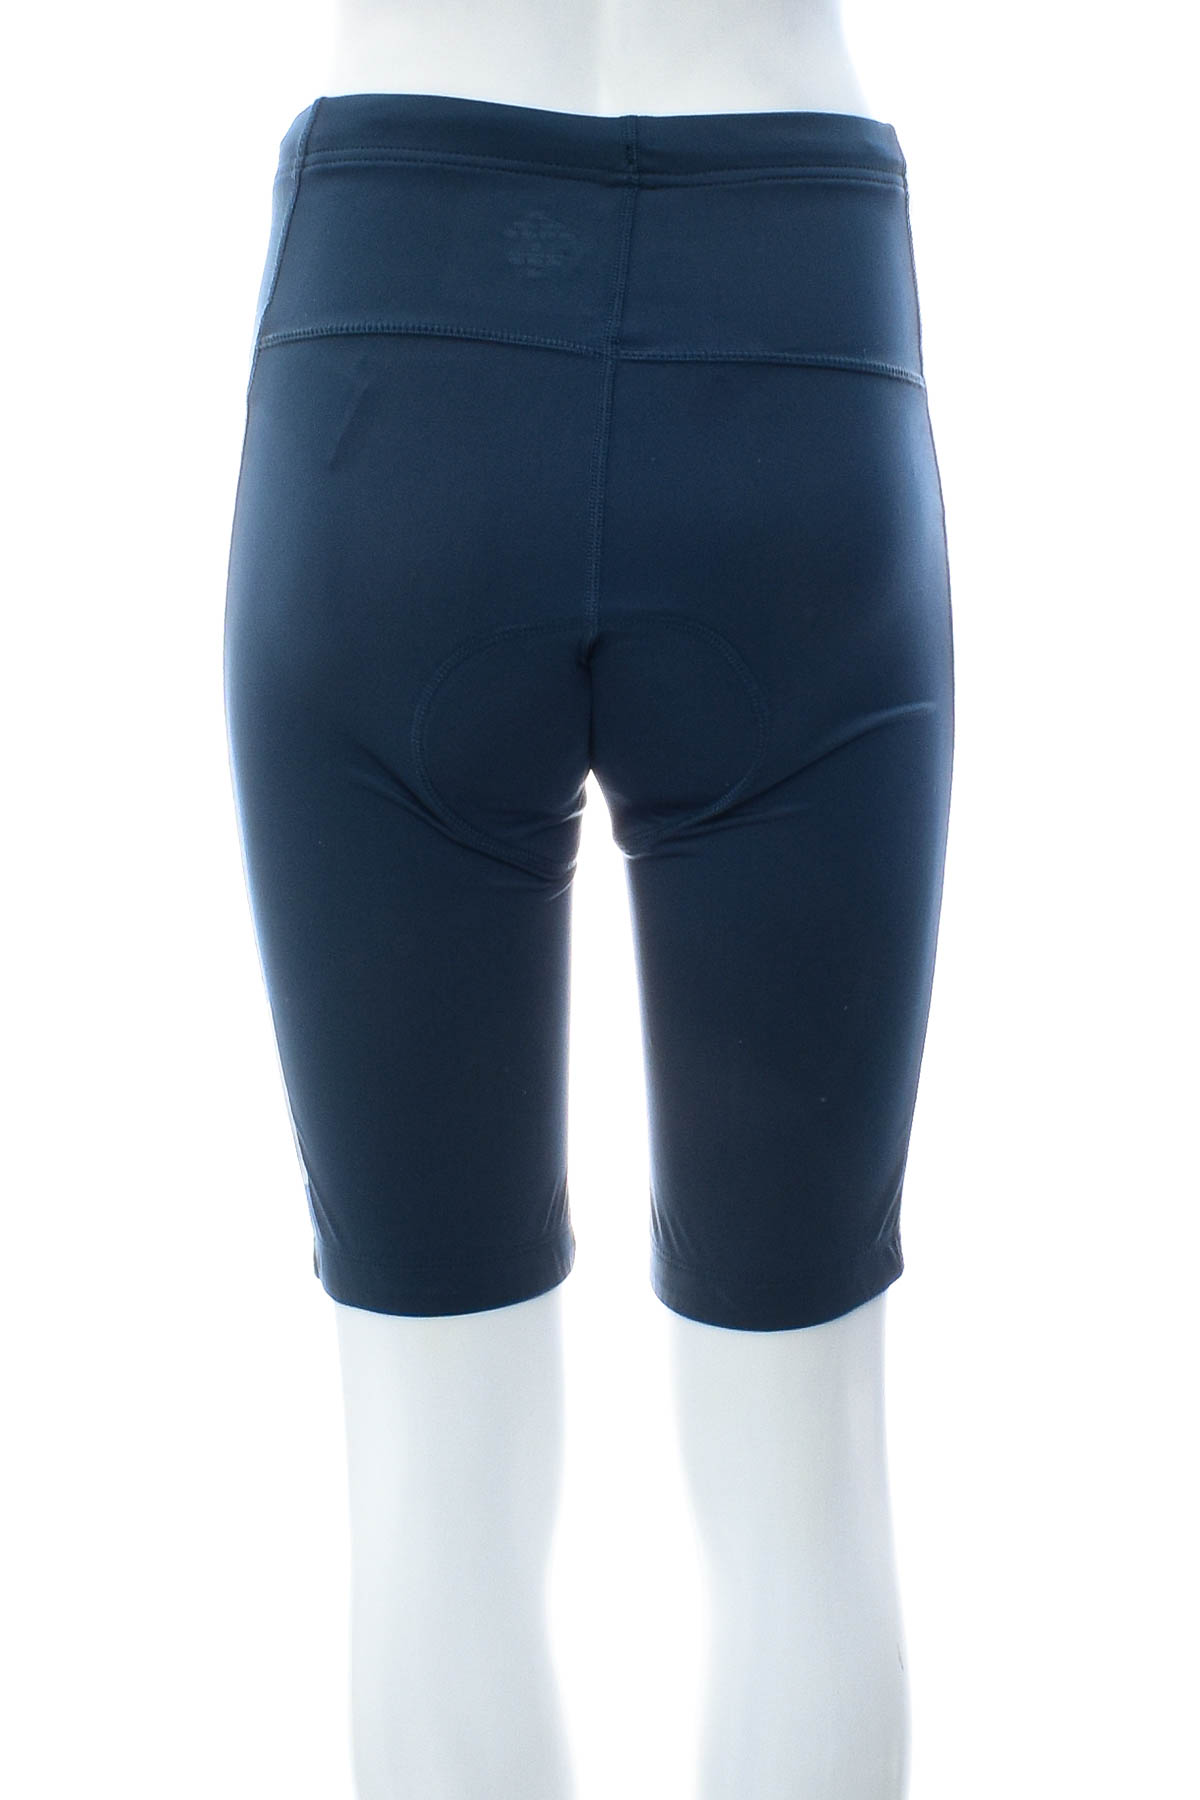 Women's cycling tights - Active Touch - 1